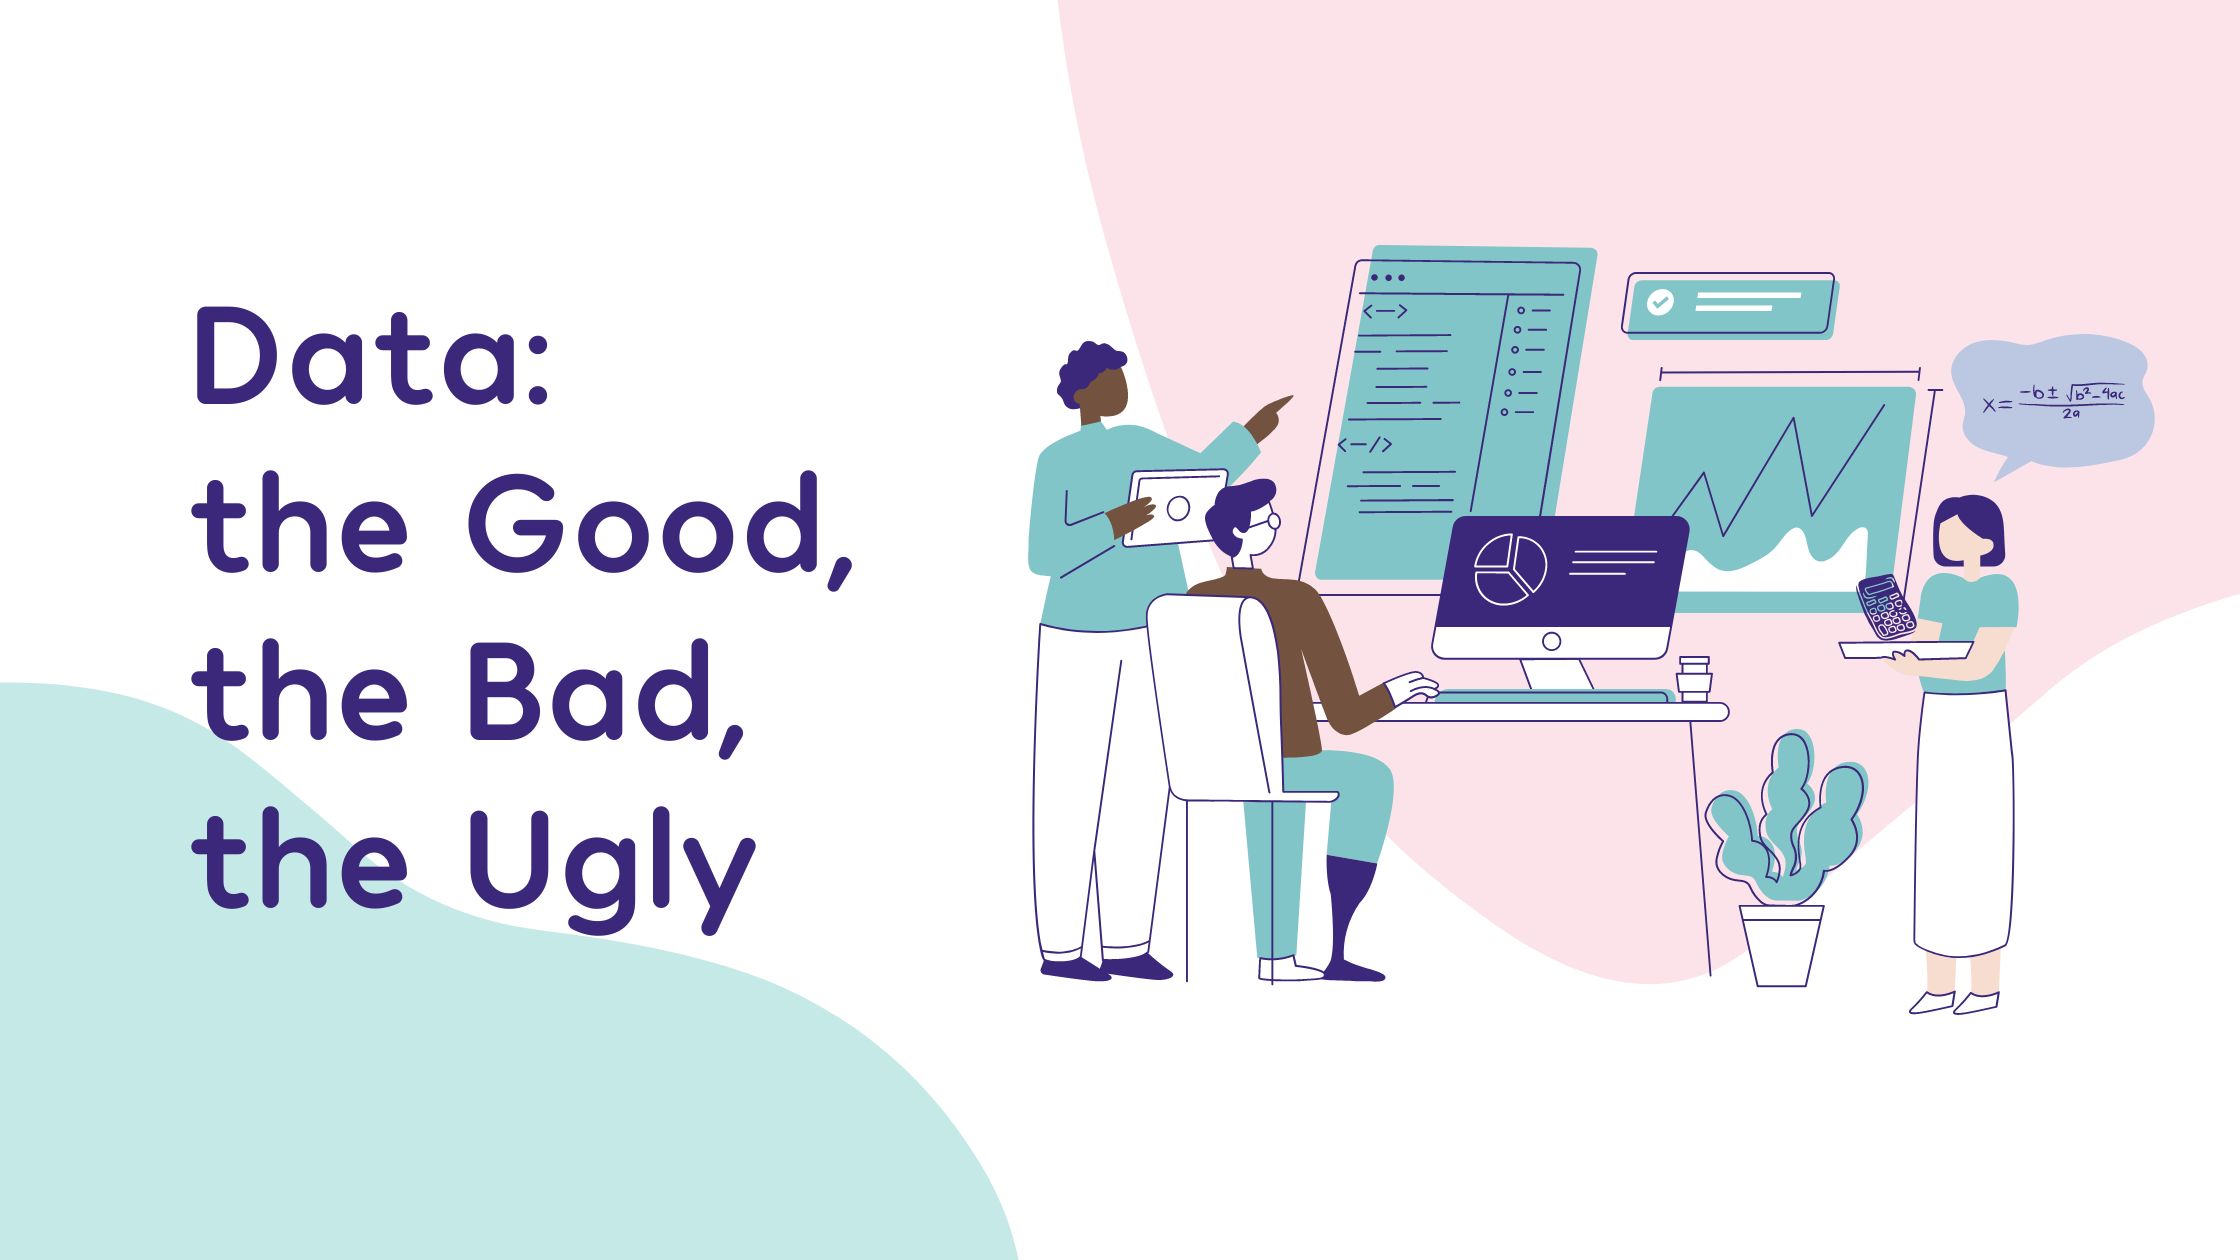 The Good The Bad And The Ugly -  - Blog